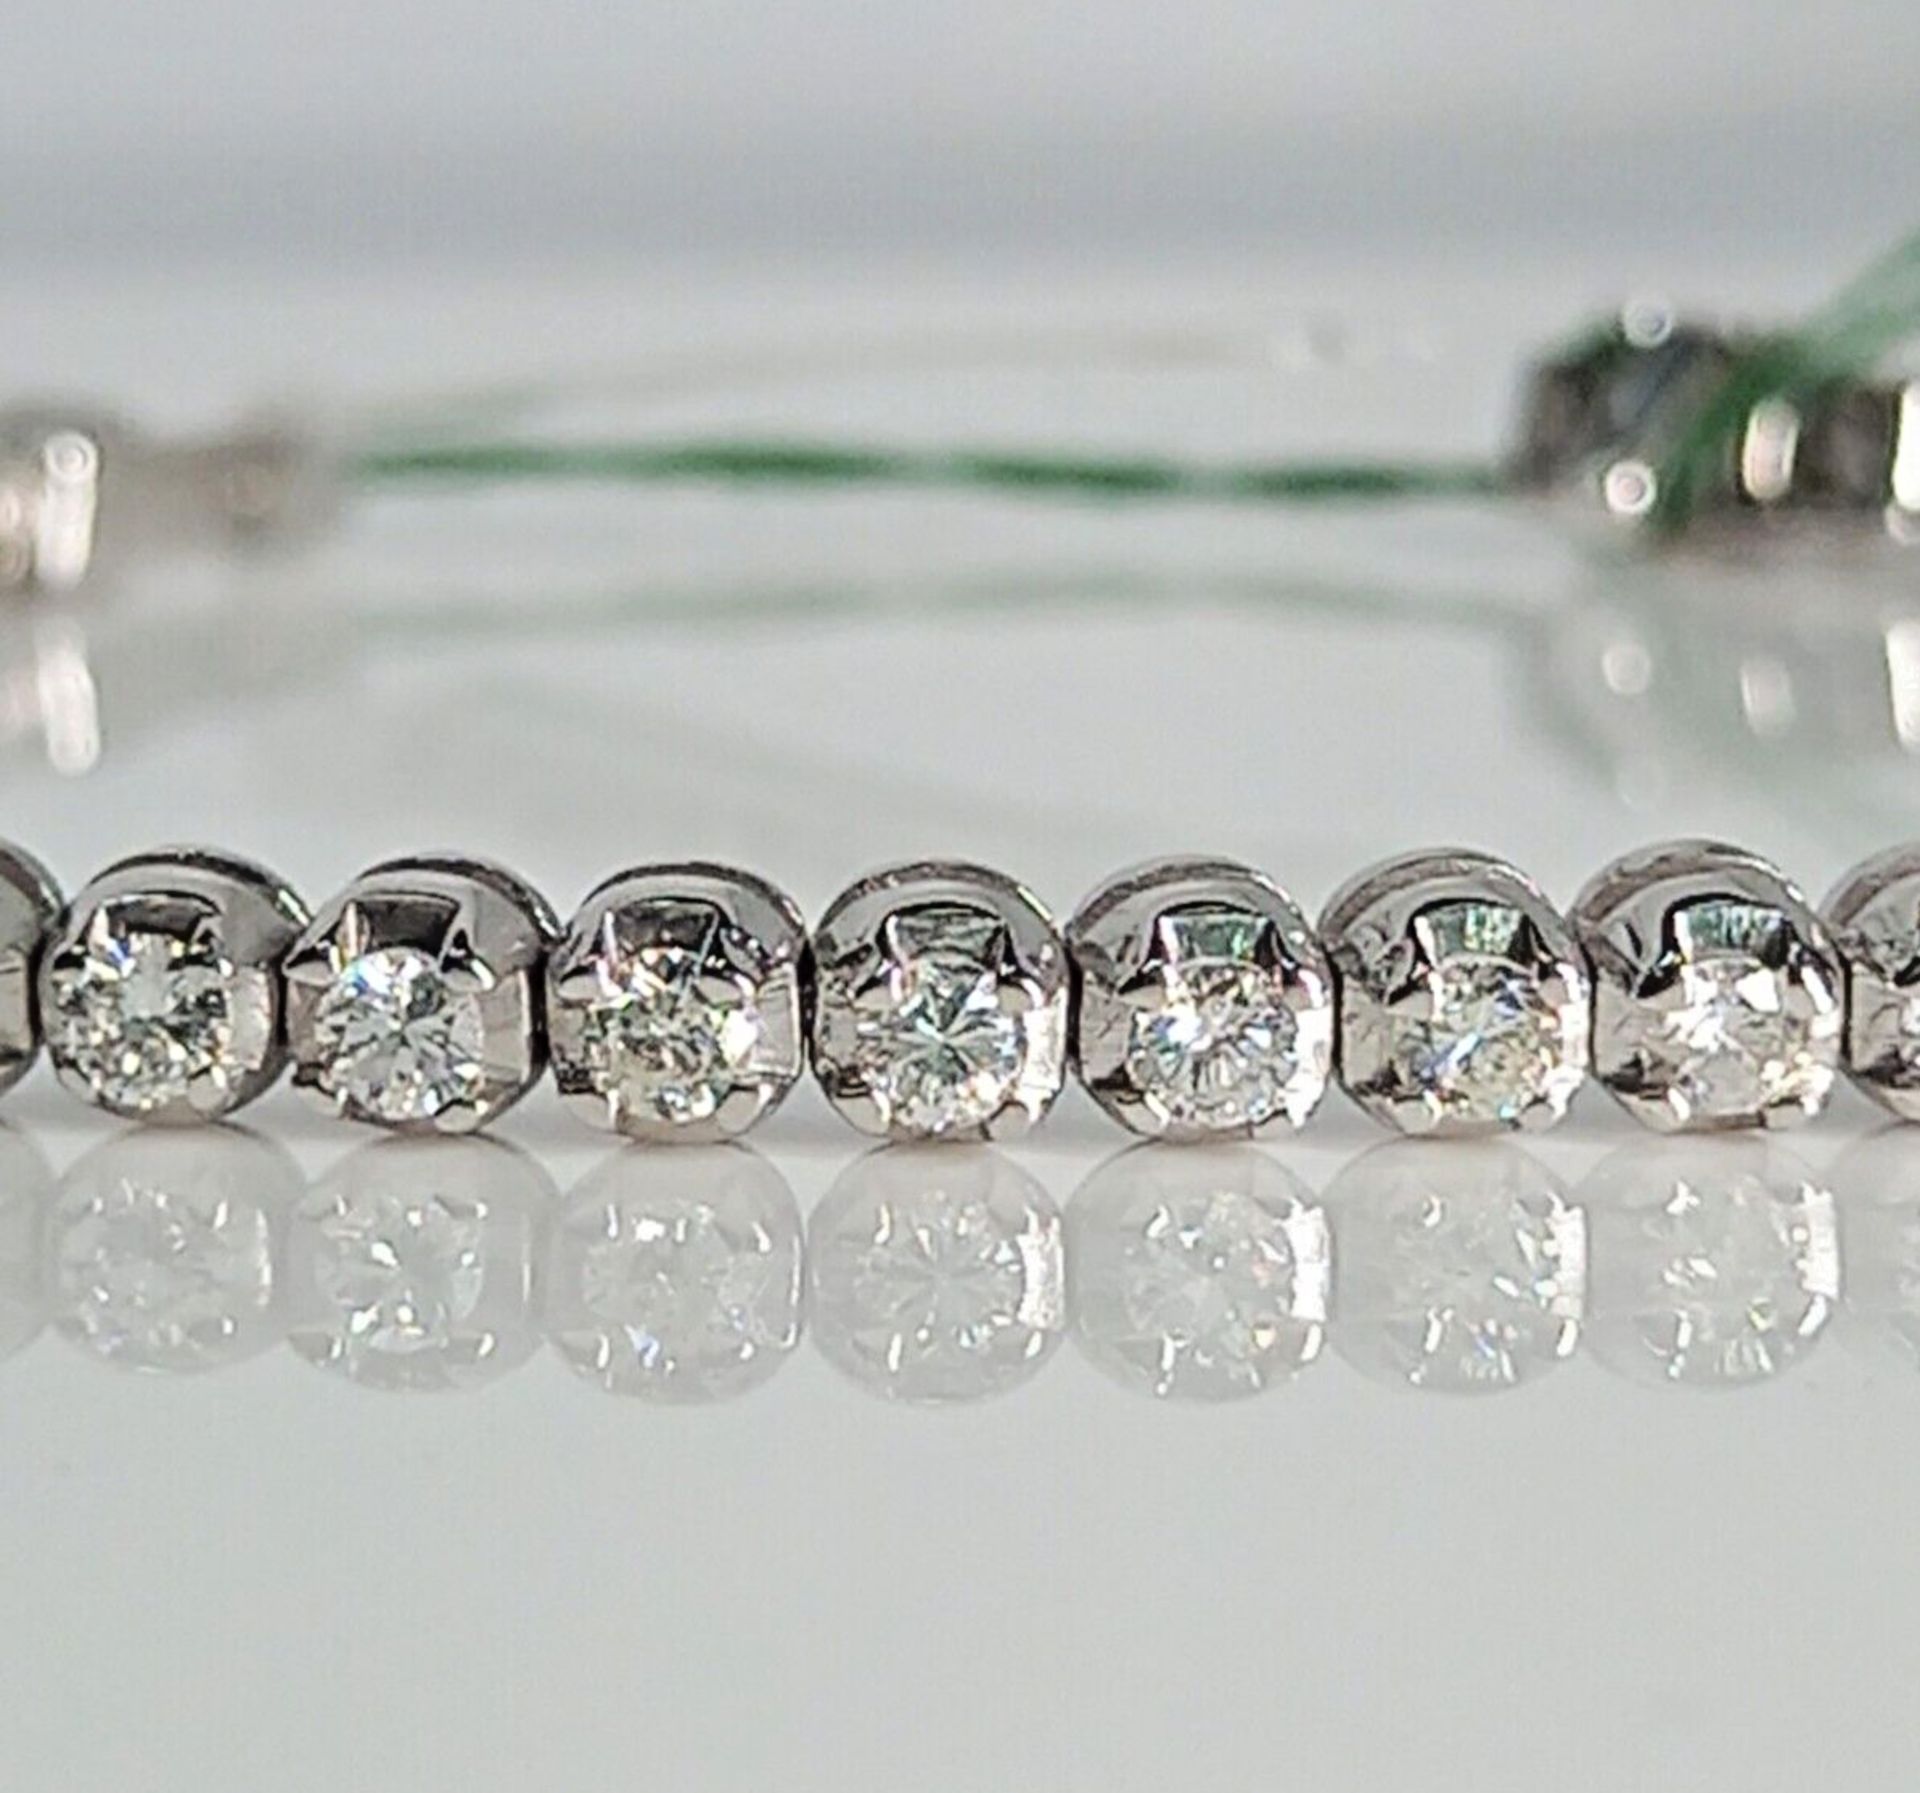 2.39CT DIAMOND TENNIS BRACELET 18CT WHITE GOLD IN GIFT BOX WITH VALUATION CERTIFICATE OF £7,995 - Image 2 of 3